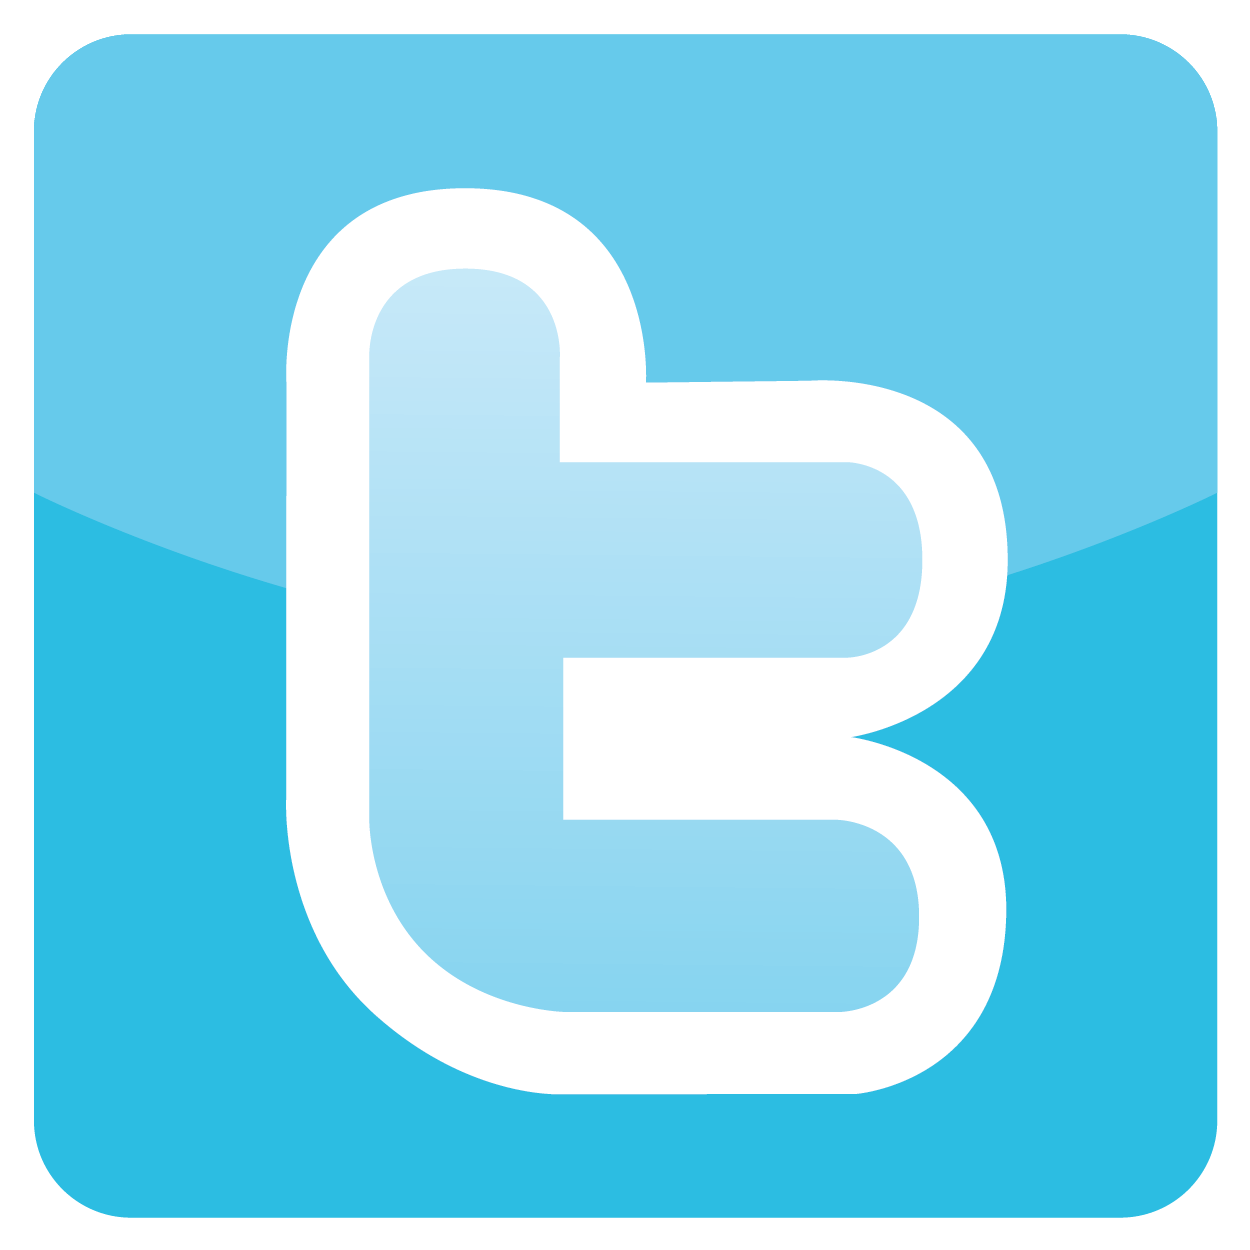 Twitter Logo Png - Twitter, Transparent background PNG HD thumbnail